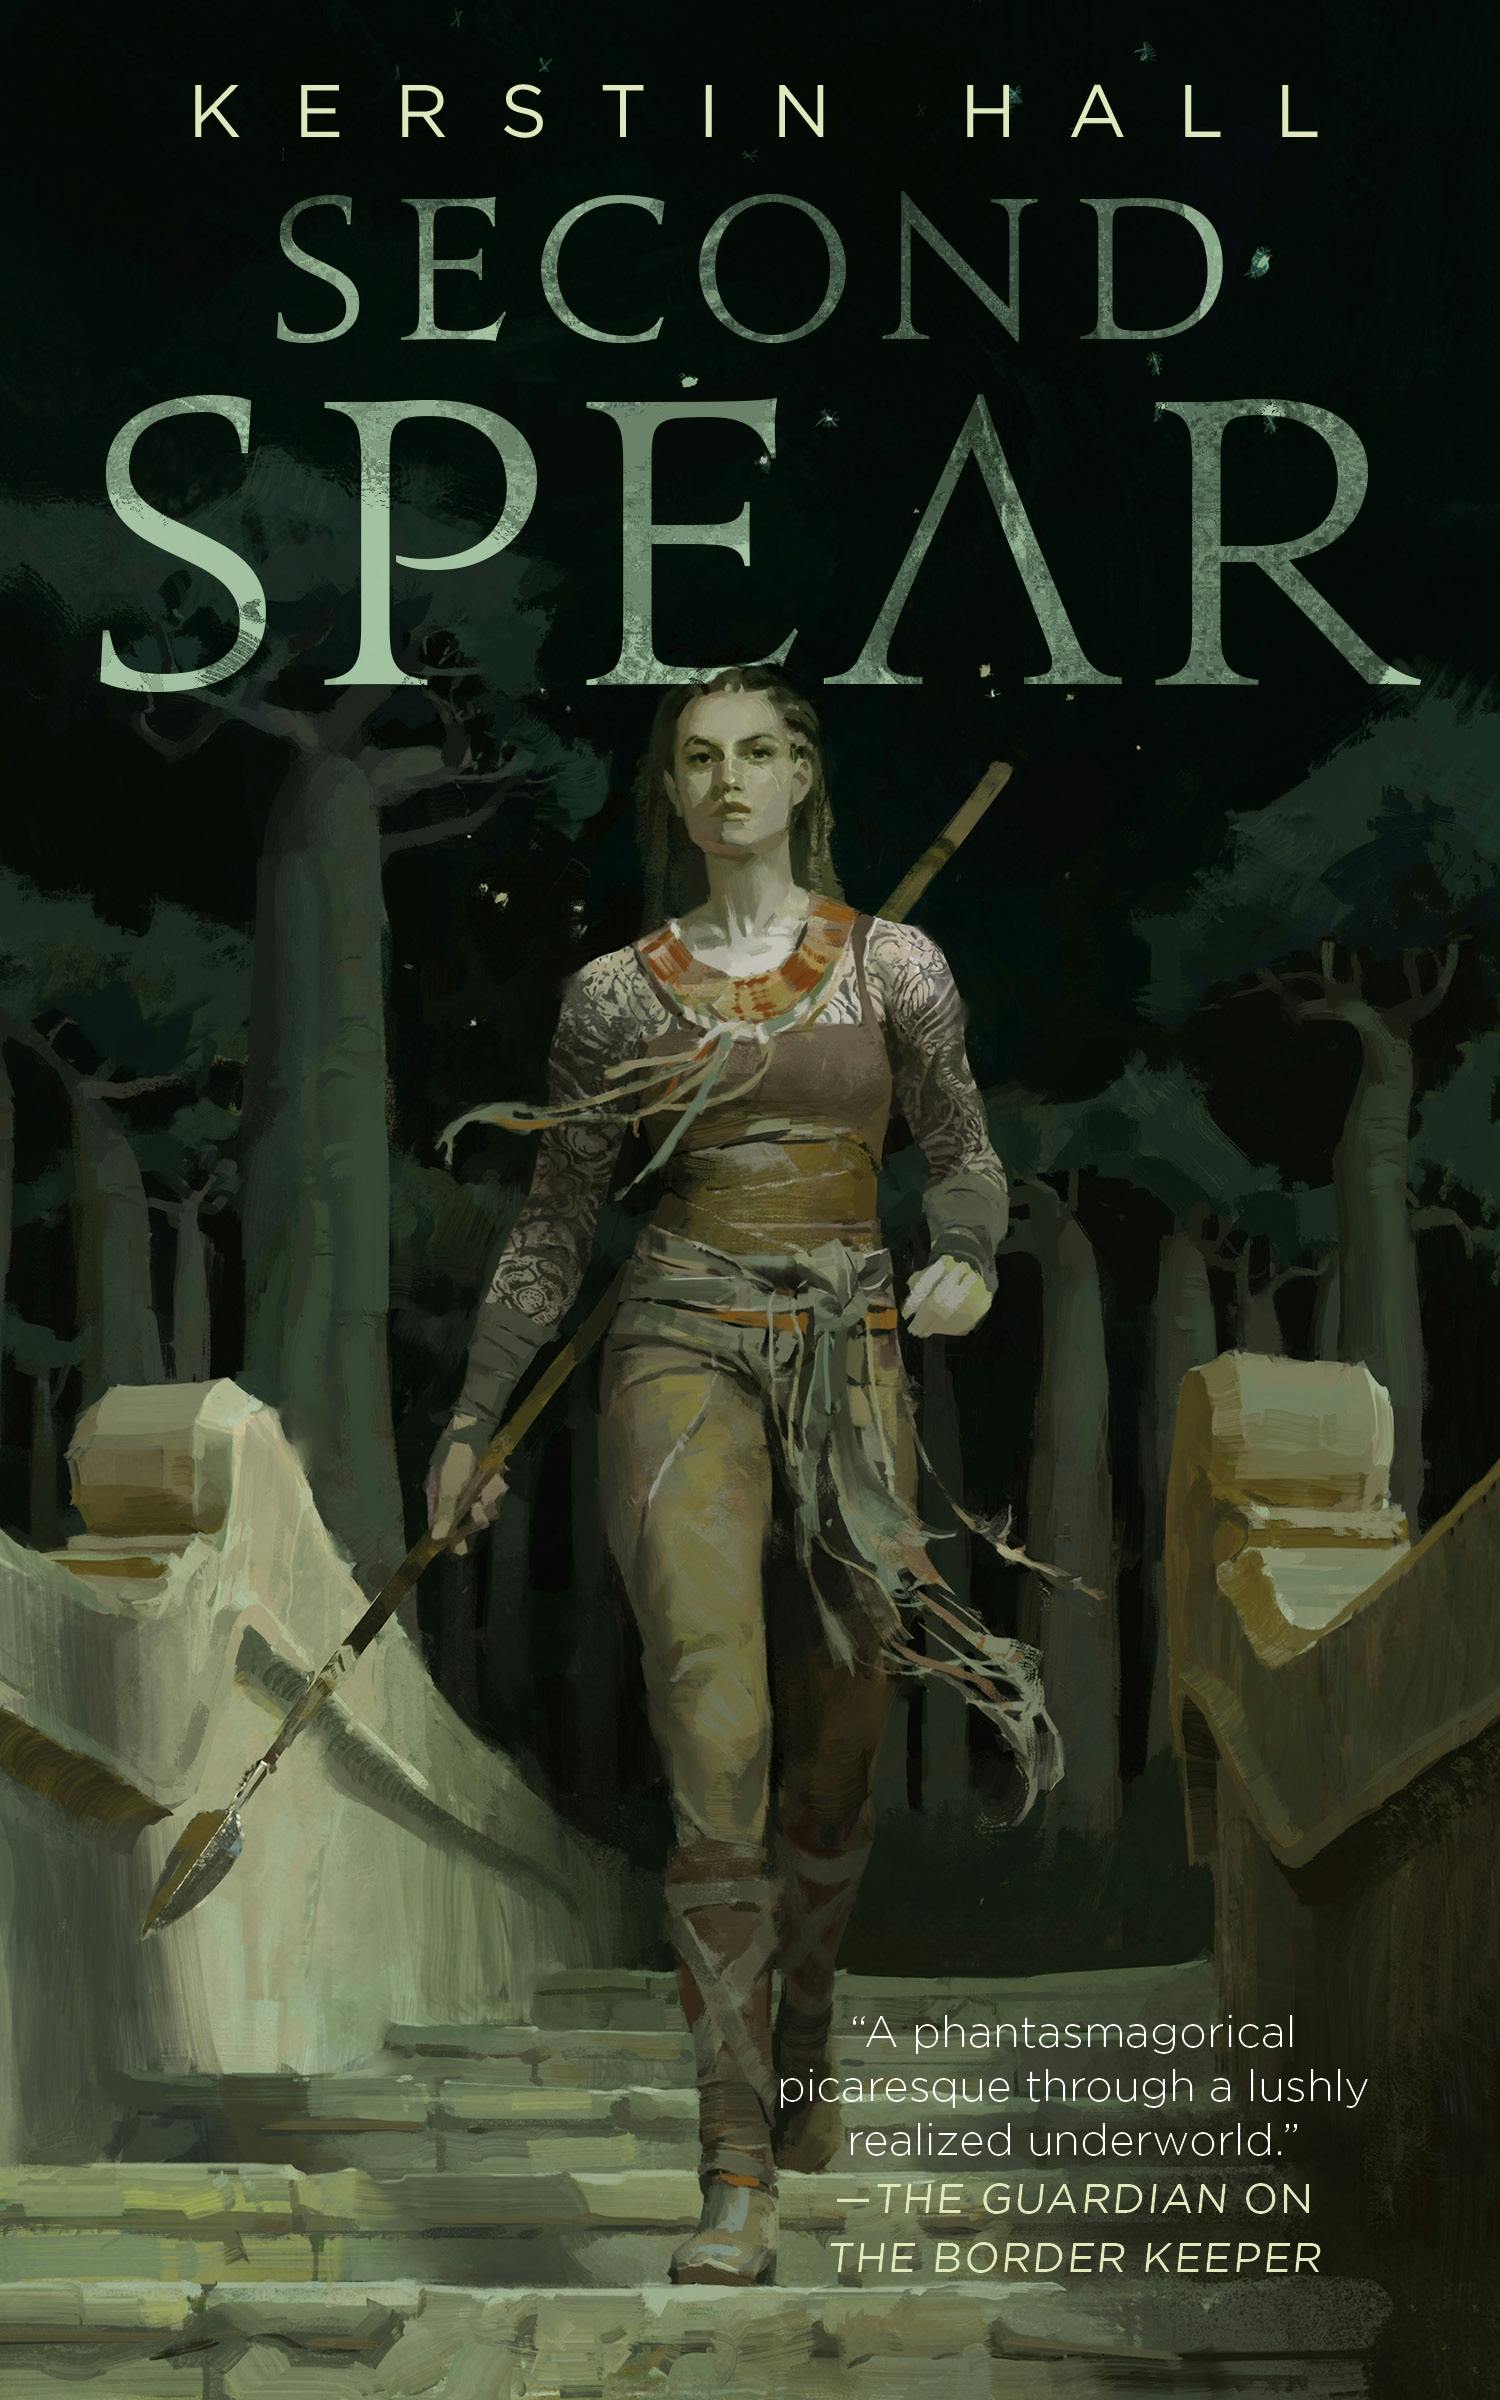 Cover for the book titled as: Second Spear